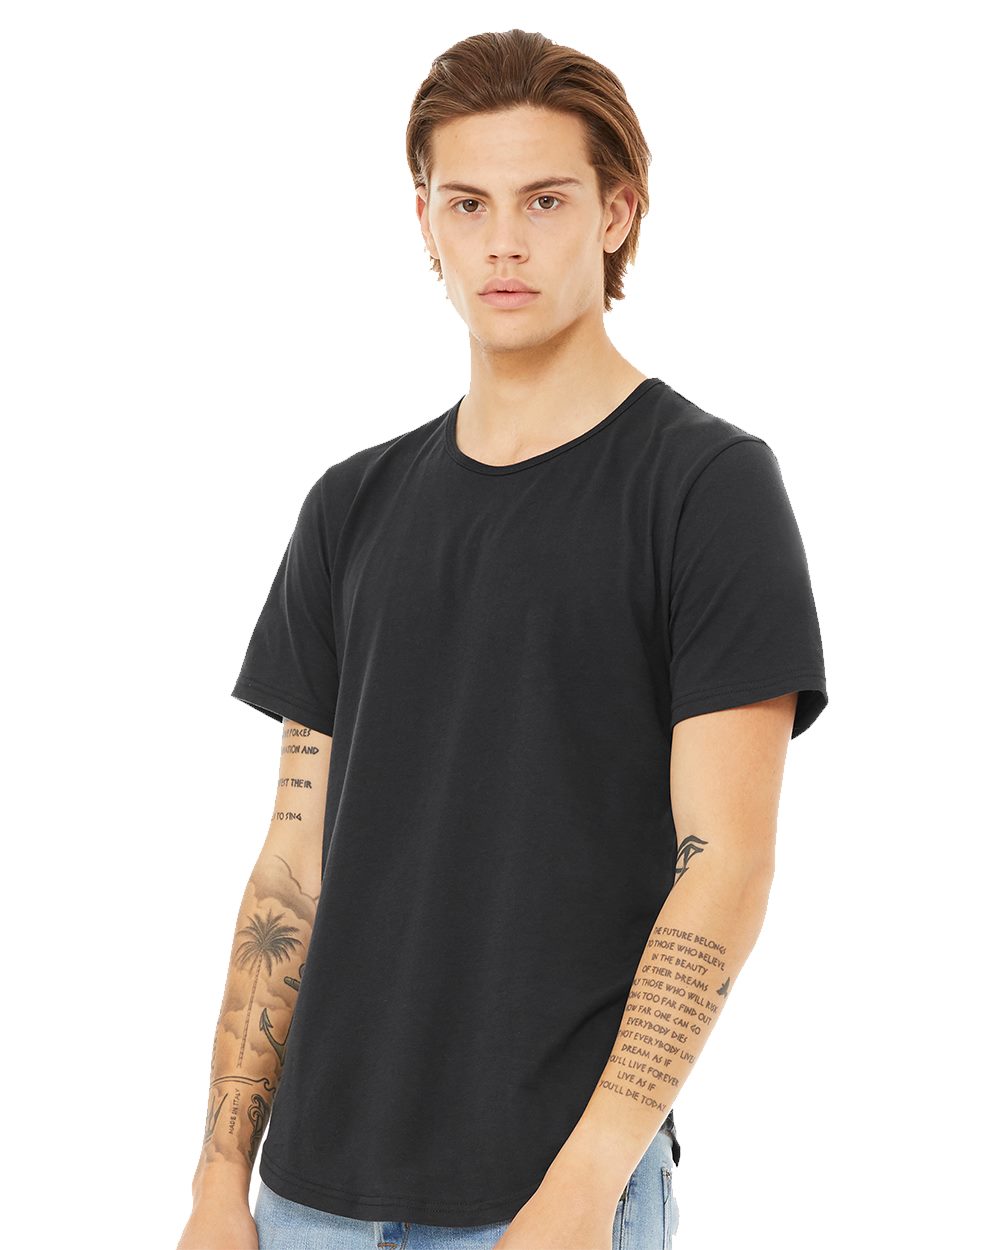 BELLA + CANVAS Jersey Curved Hem Tee - image 2 of 3